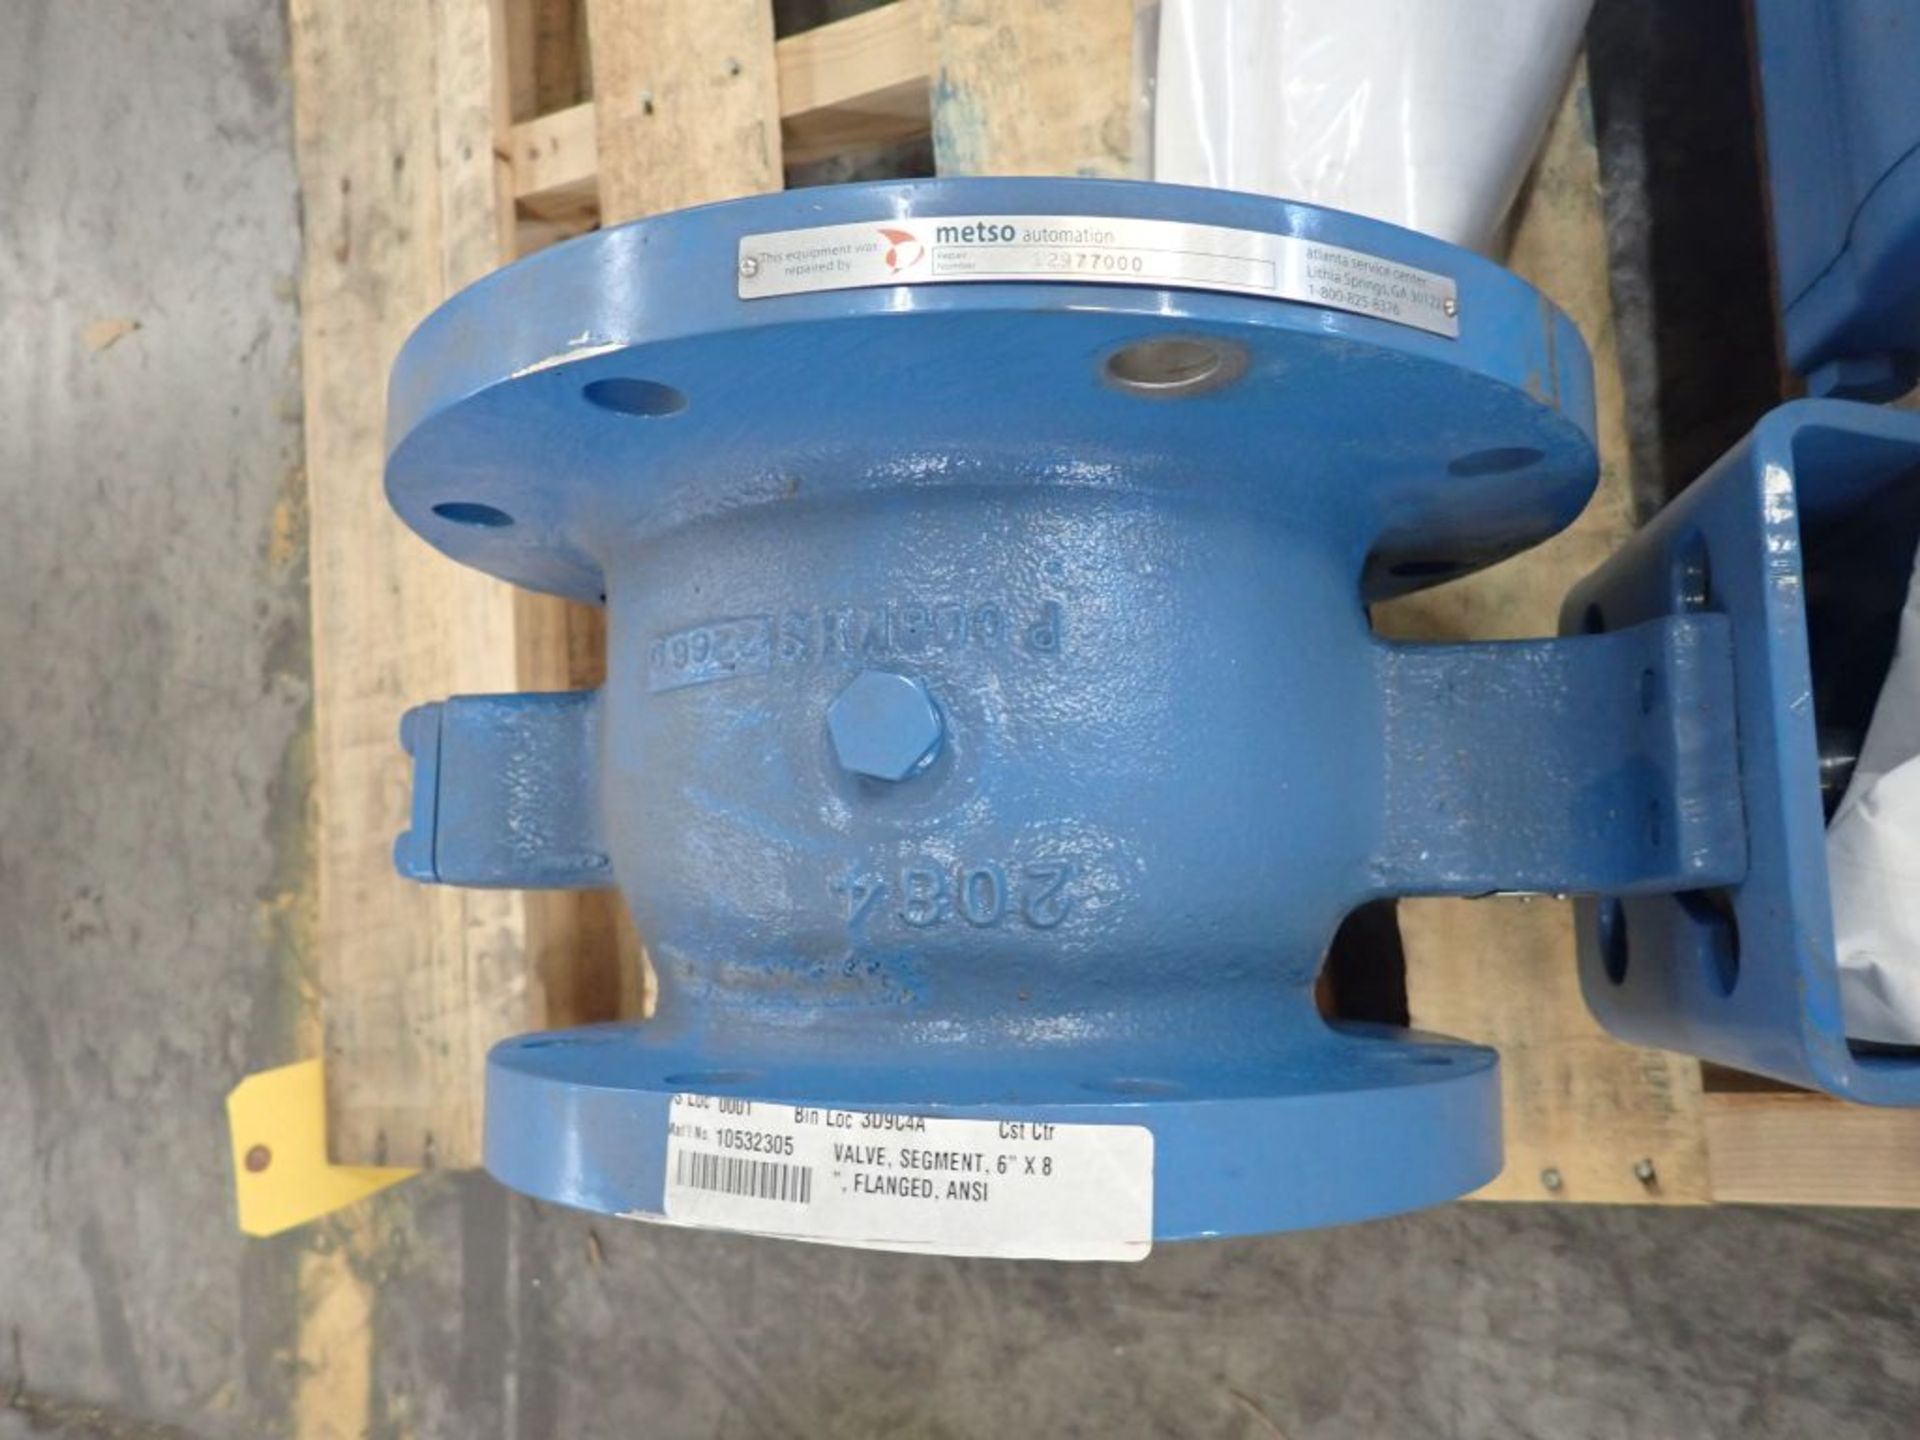 Metso Flanged Valve Segment - Model No. 309C4A; Part No. 10532305; Size: 6" x 8"; Tag: 215781 - Image 6 of 9